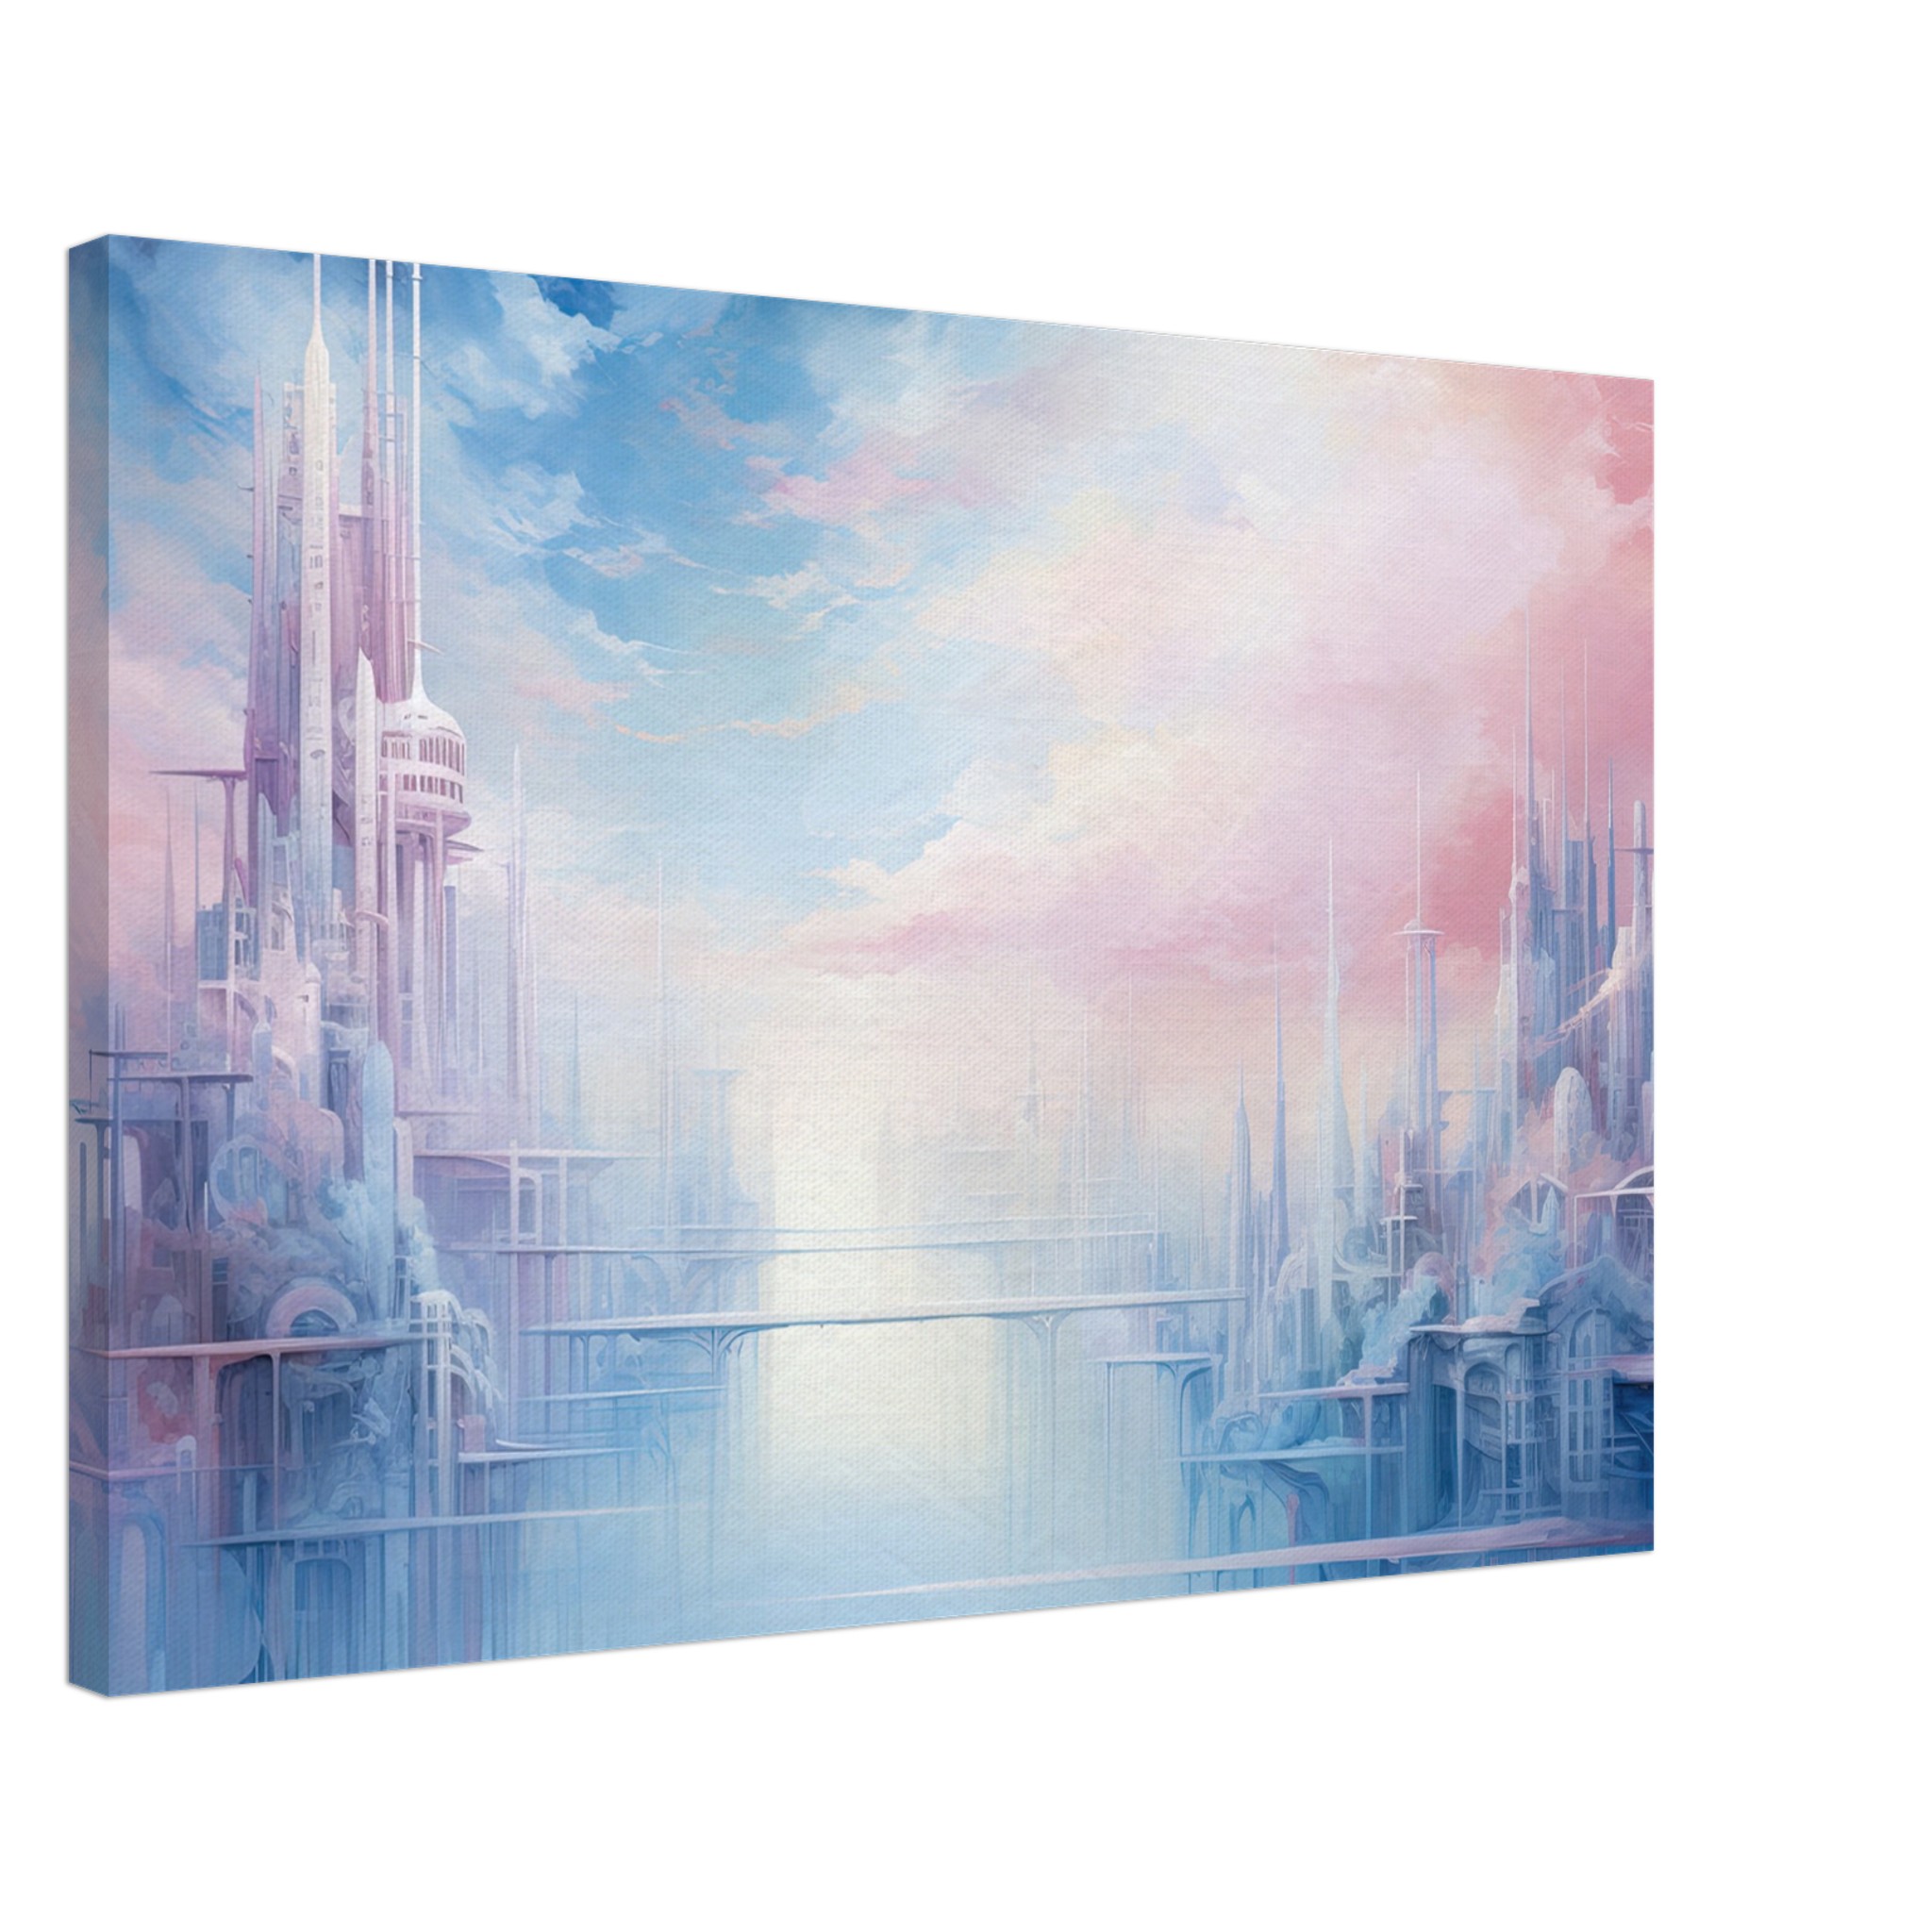 Pastel City in the Clouds Canvas Print – 50×75 cm / 20×30″, Slim